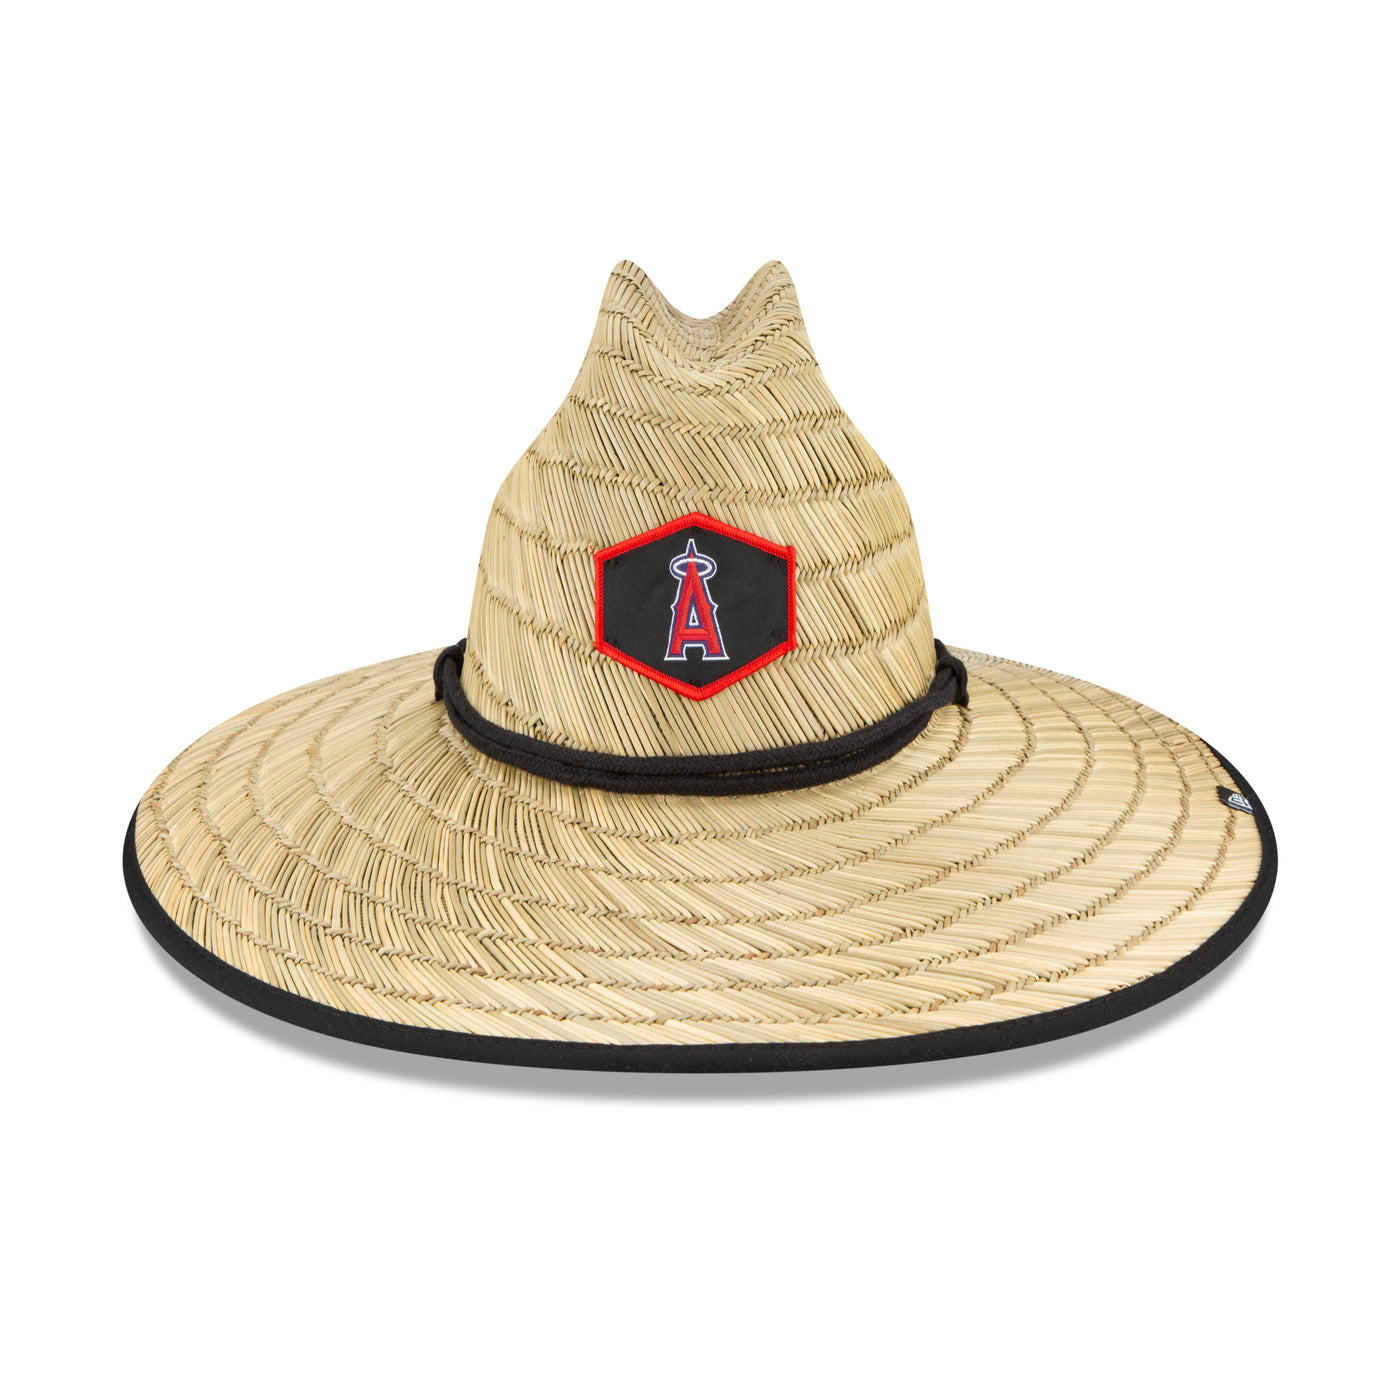 Straw hat with black chin strap, black brim, and an Angels patch on the front